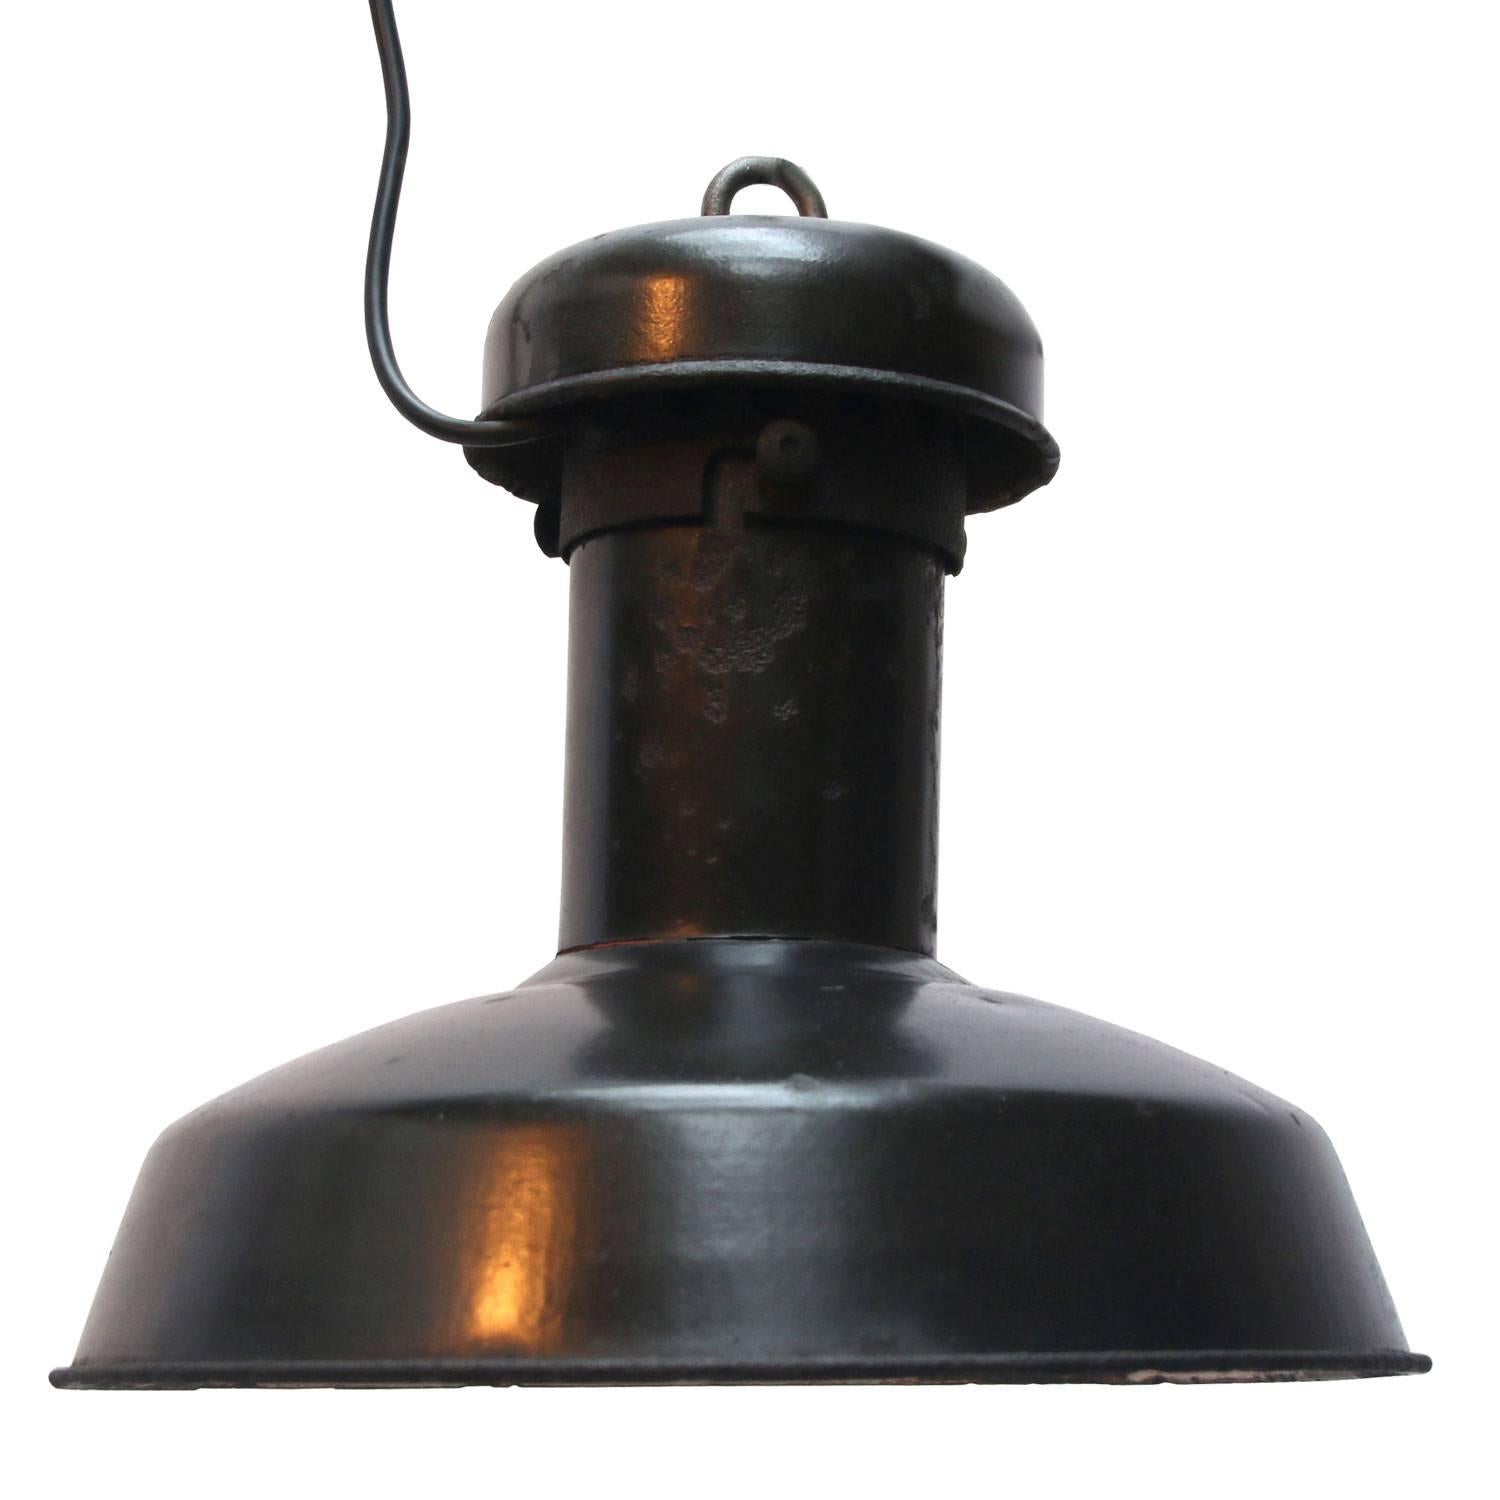 French factory light. Black enamel shade. Cast iron top. White inside.

Weight: 2.2 kg / 4.9 lb

All lamps have been made suitable by international standards for incandescent light bulbs, energy-efficient and LED bulbs. E26/E27 bulb holders and new